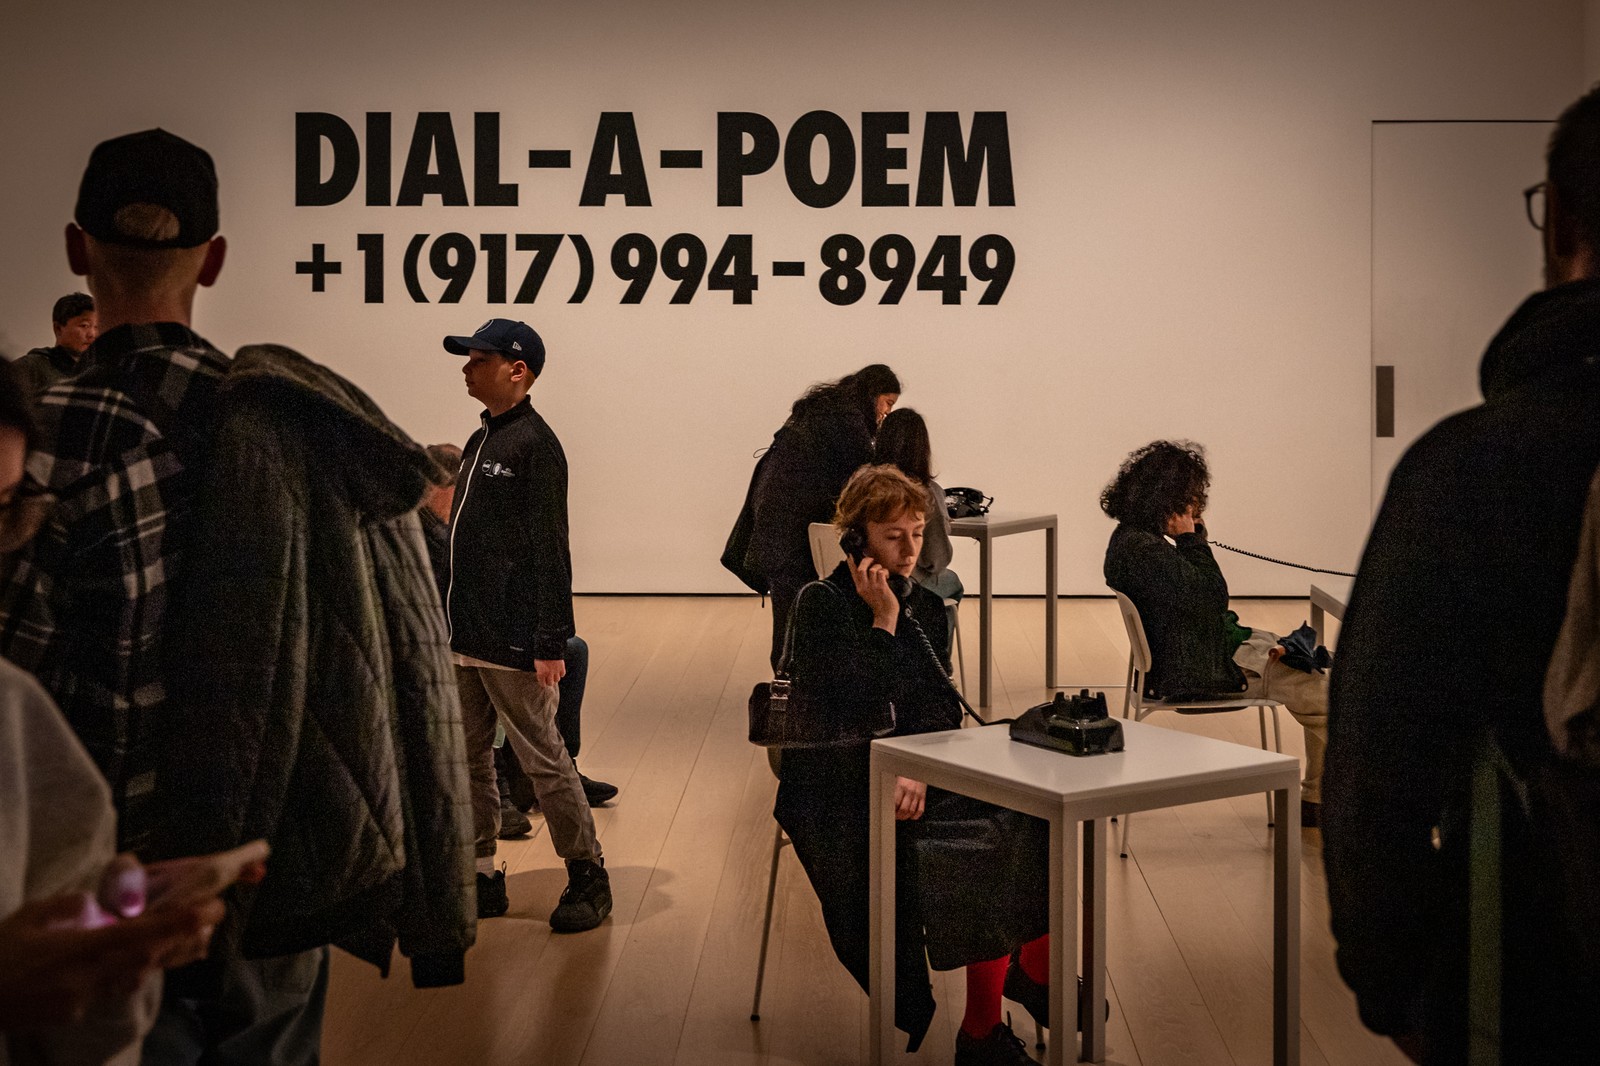 Dial-a-Poem, MoMa